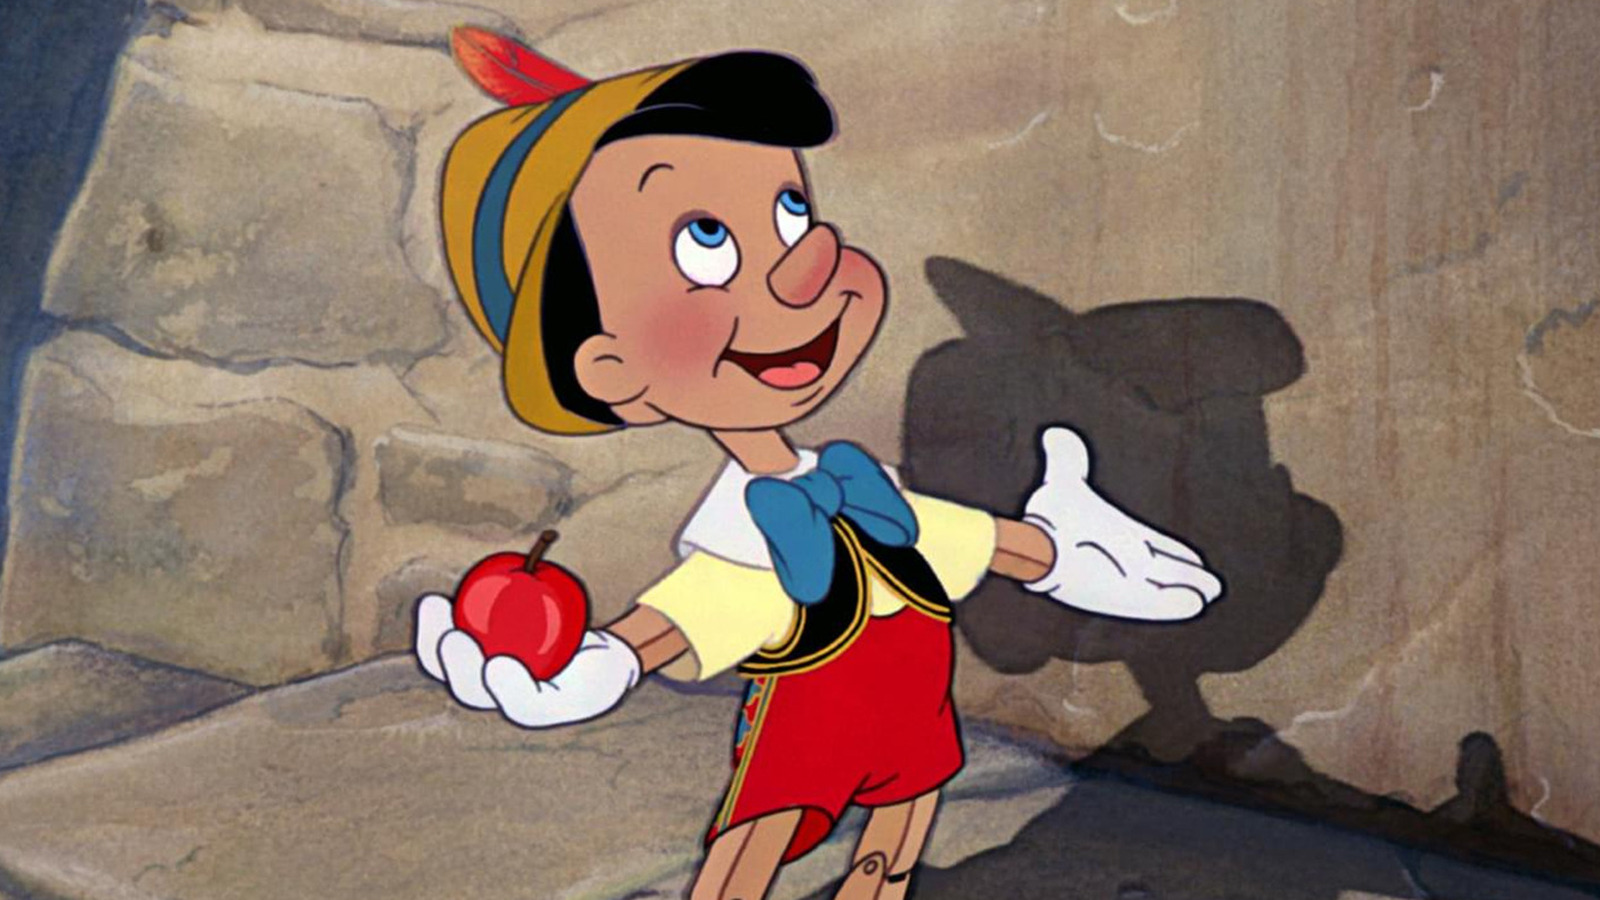 Everything We Know About Disney's Live-Action Pinocchio So Far